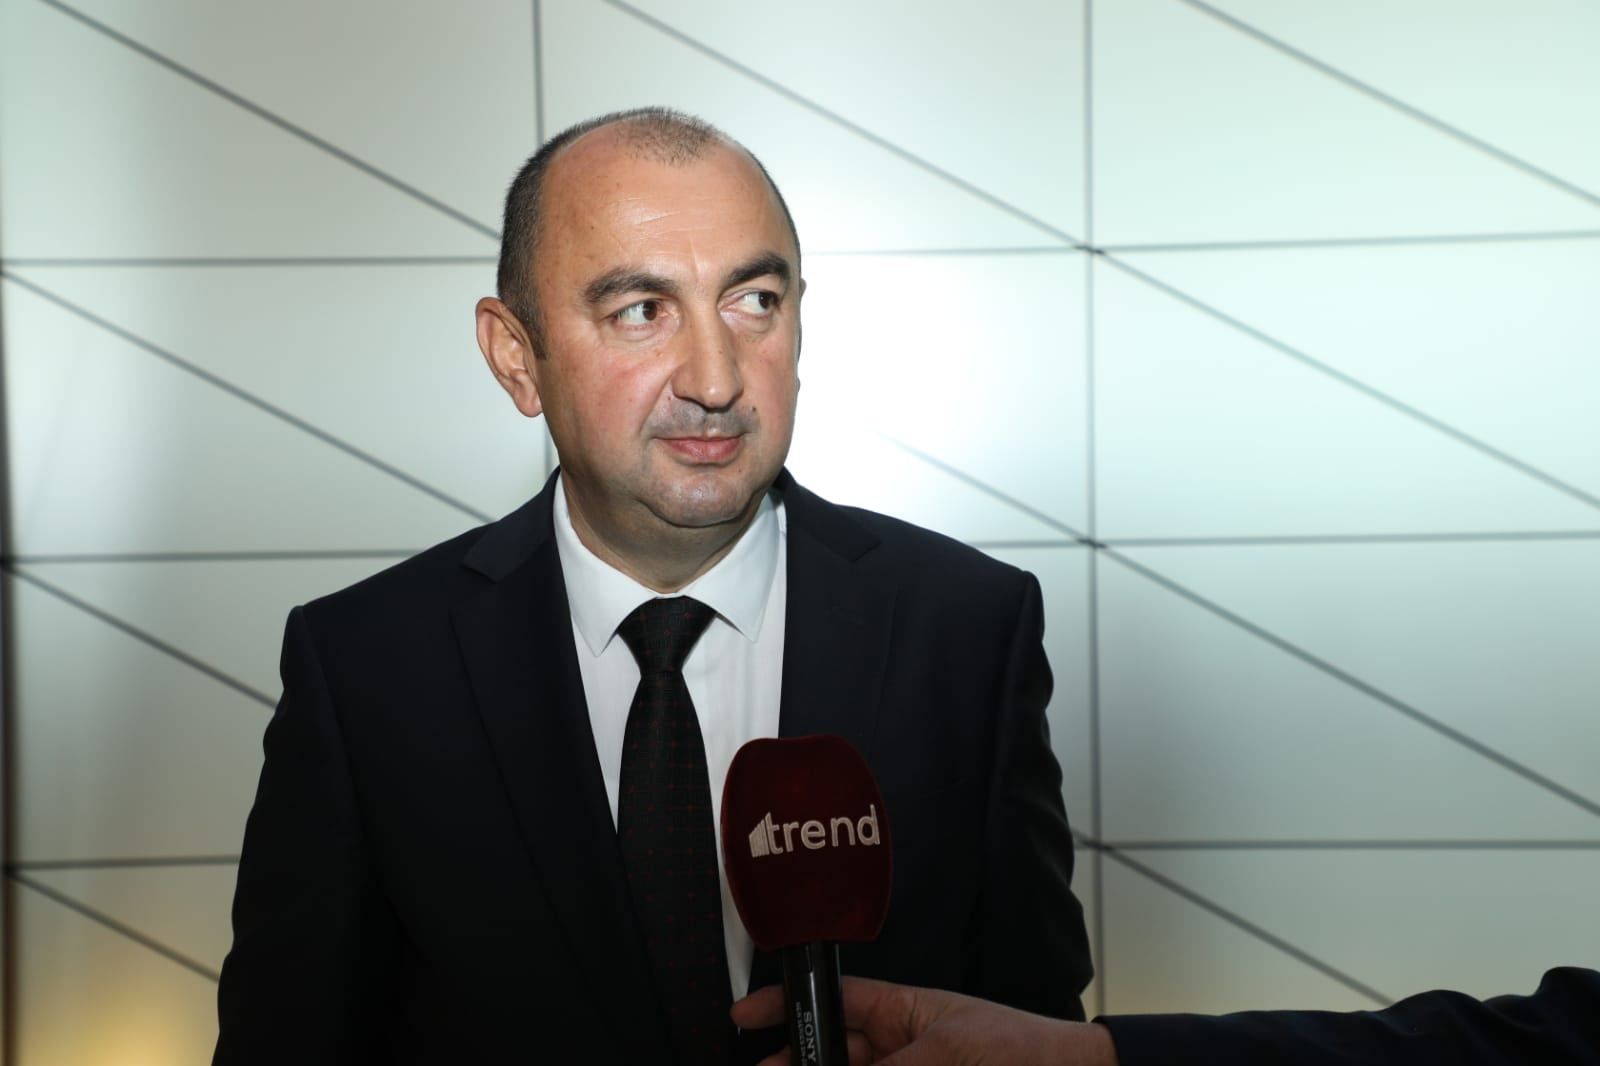 "Friendship Forest" in Azerbaijan's Jabrayil to cover area of 20 hectares - deputy minister